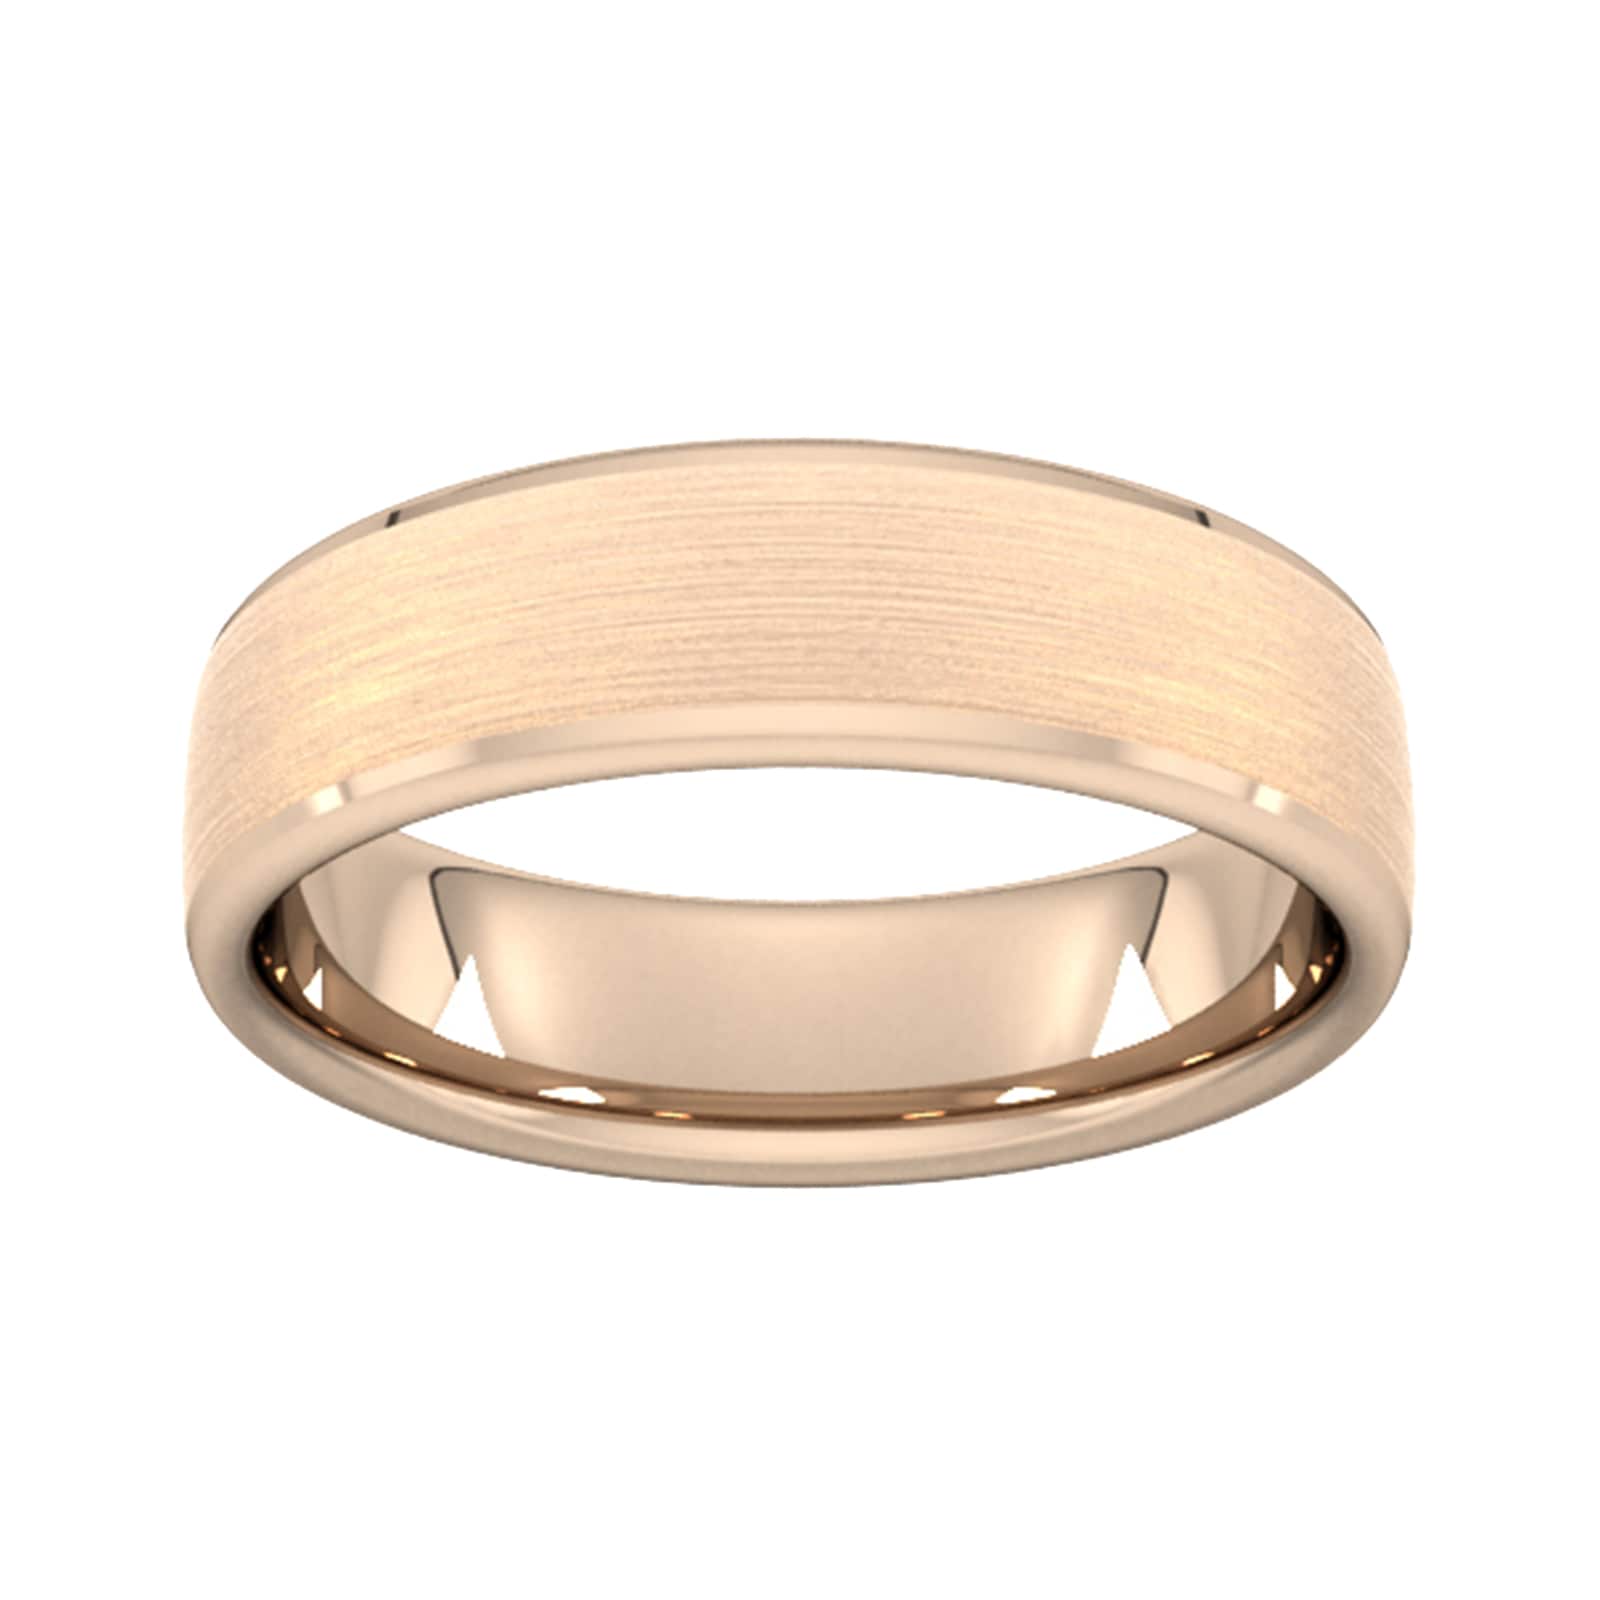 6mm Traditional Court Standard Polished Chamfered Edges With Matt Centre Wedding Ring In 18 Carat Rose Gold - Ring Size P